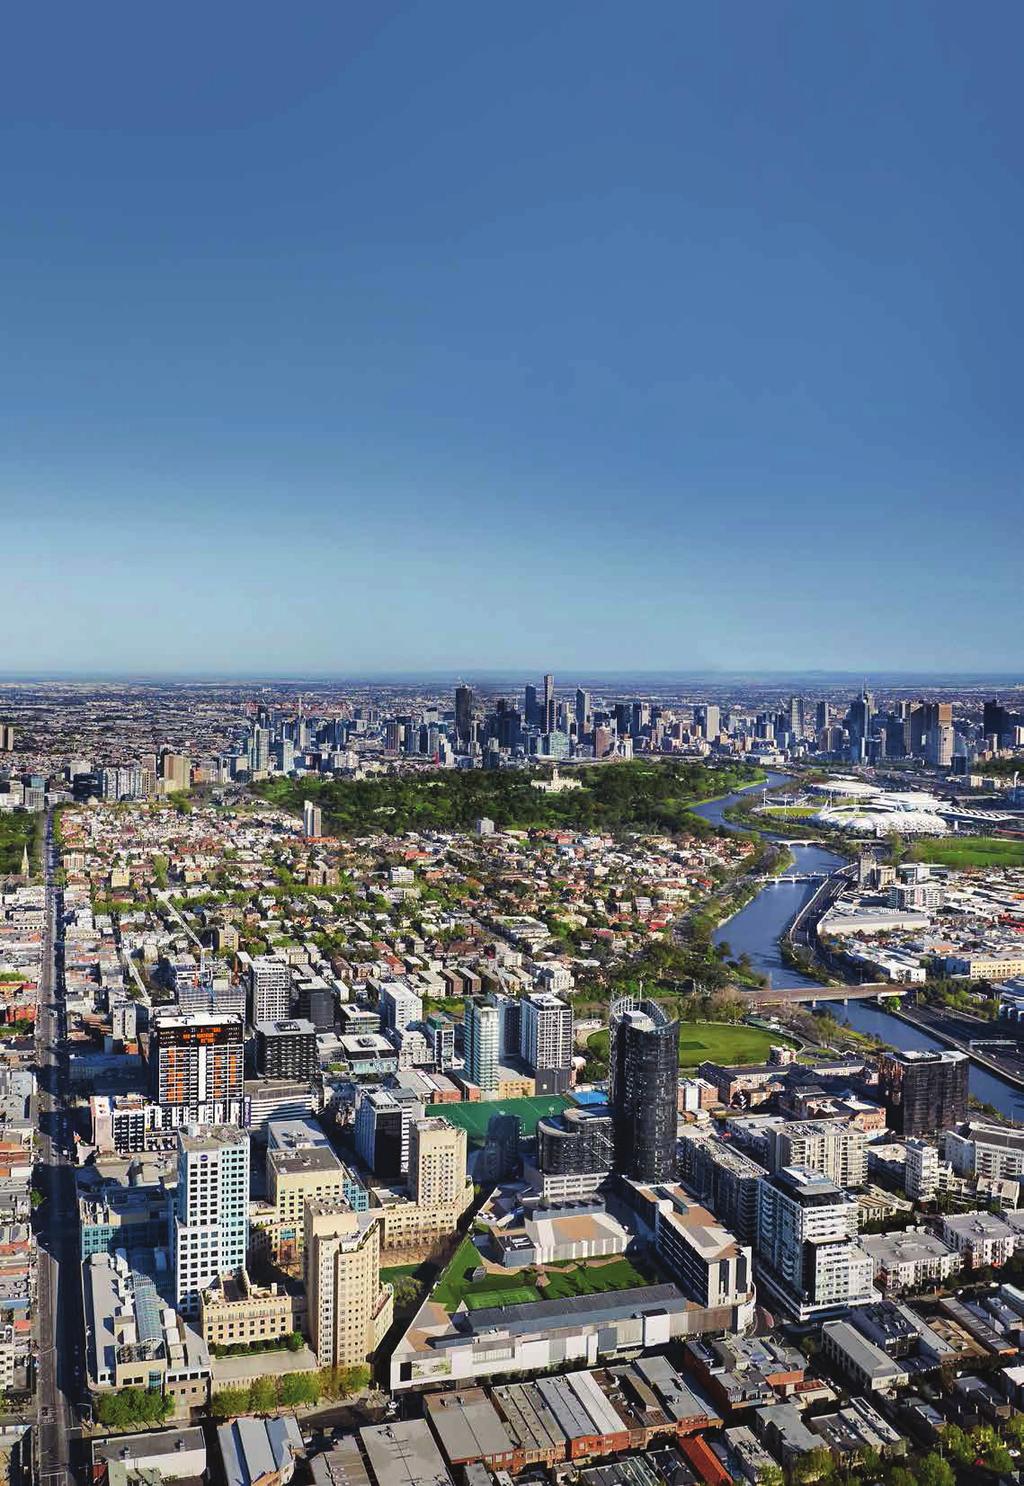 TT HH EE SOUTH YARRA IS ONE Of MELbOURNE S MOST desired INNER CITY SUbURbS